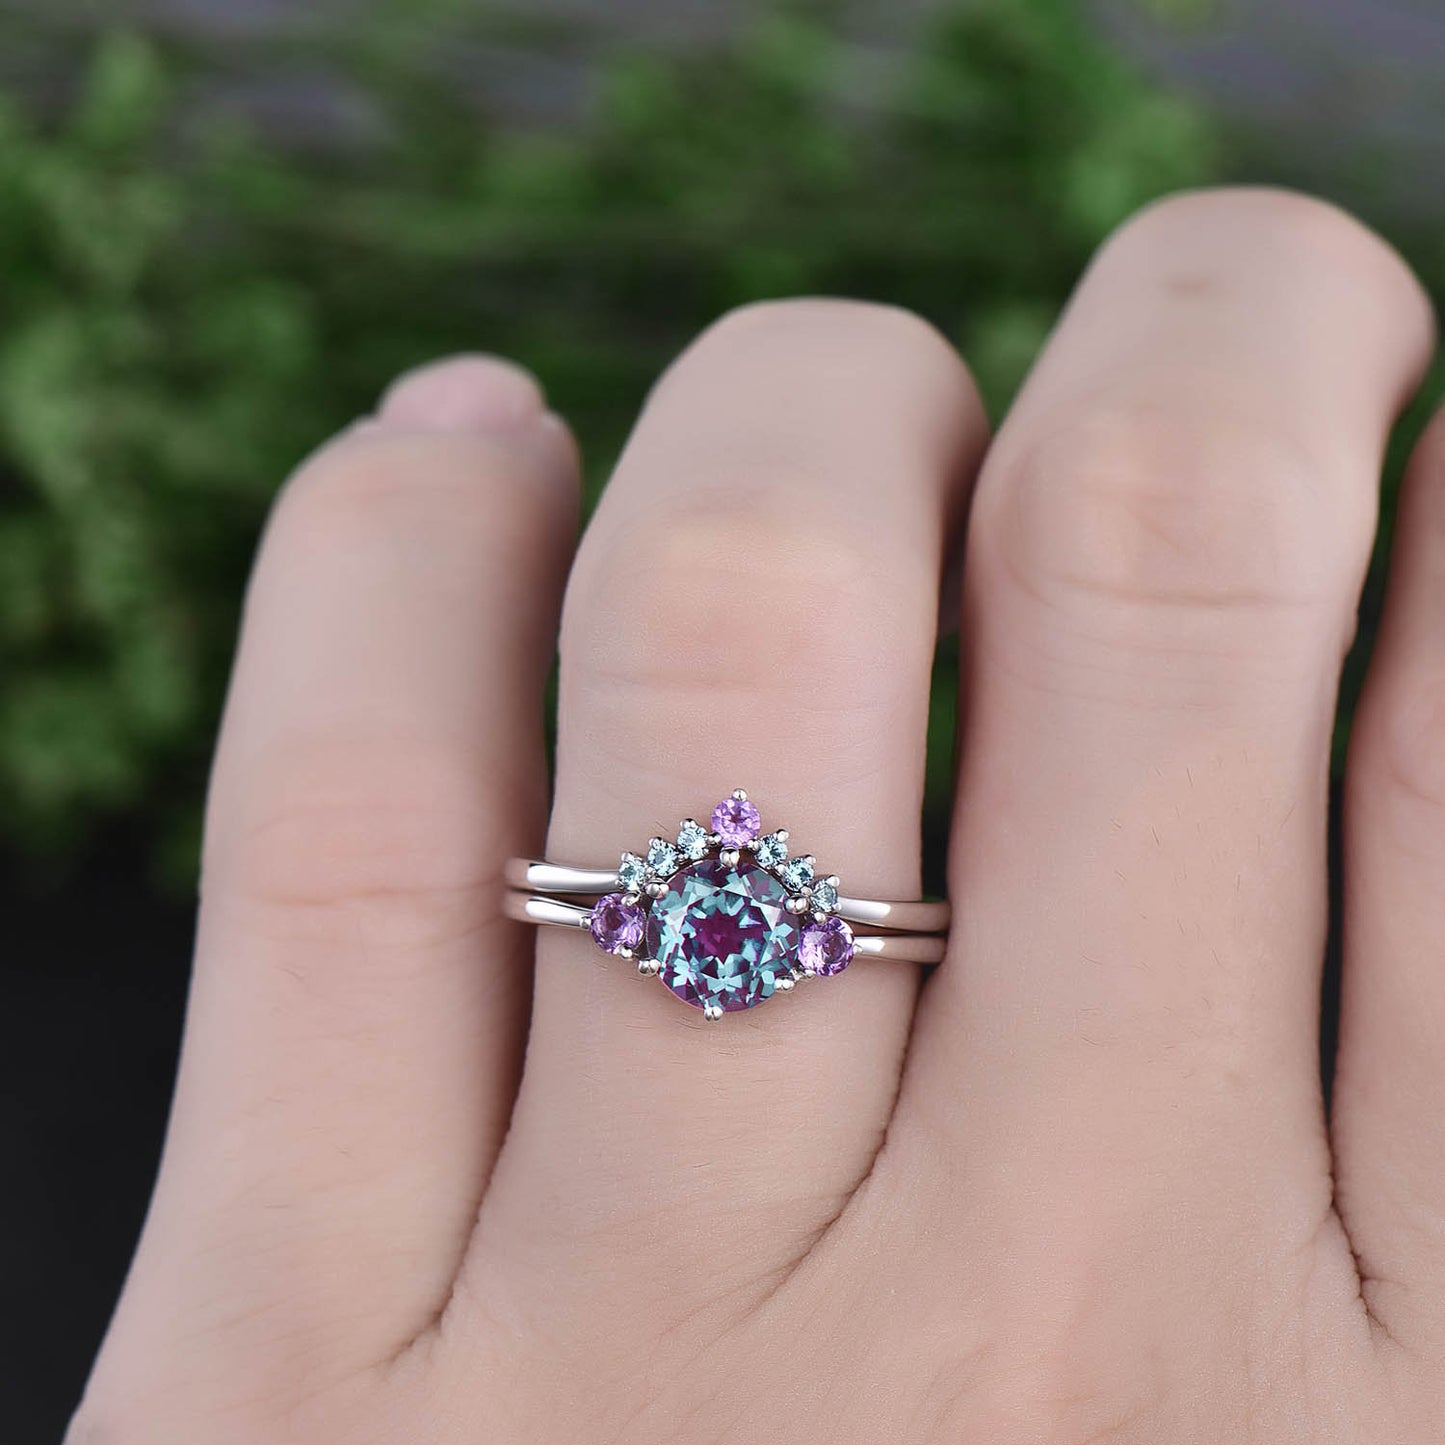 Vintage unique Three stone engagement ring color change 7mm alexandrite engagement ring set white gold amethyst ring June birthstone ring